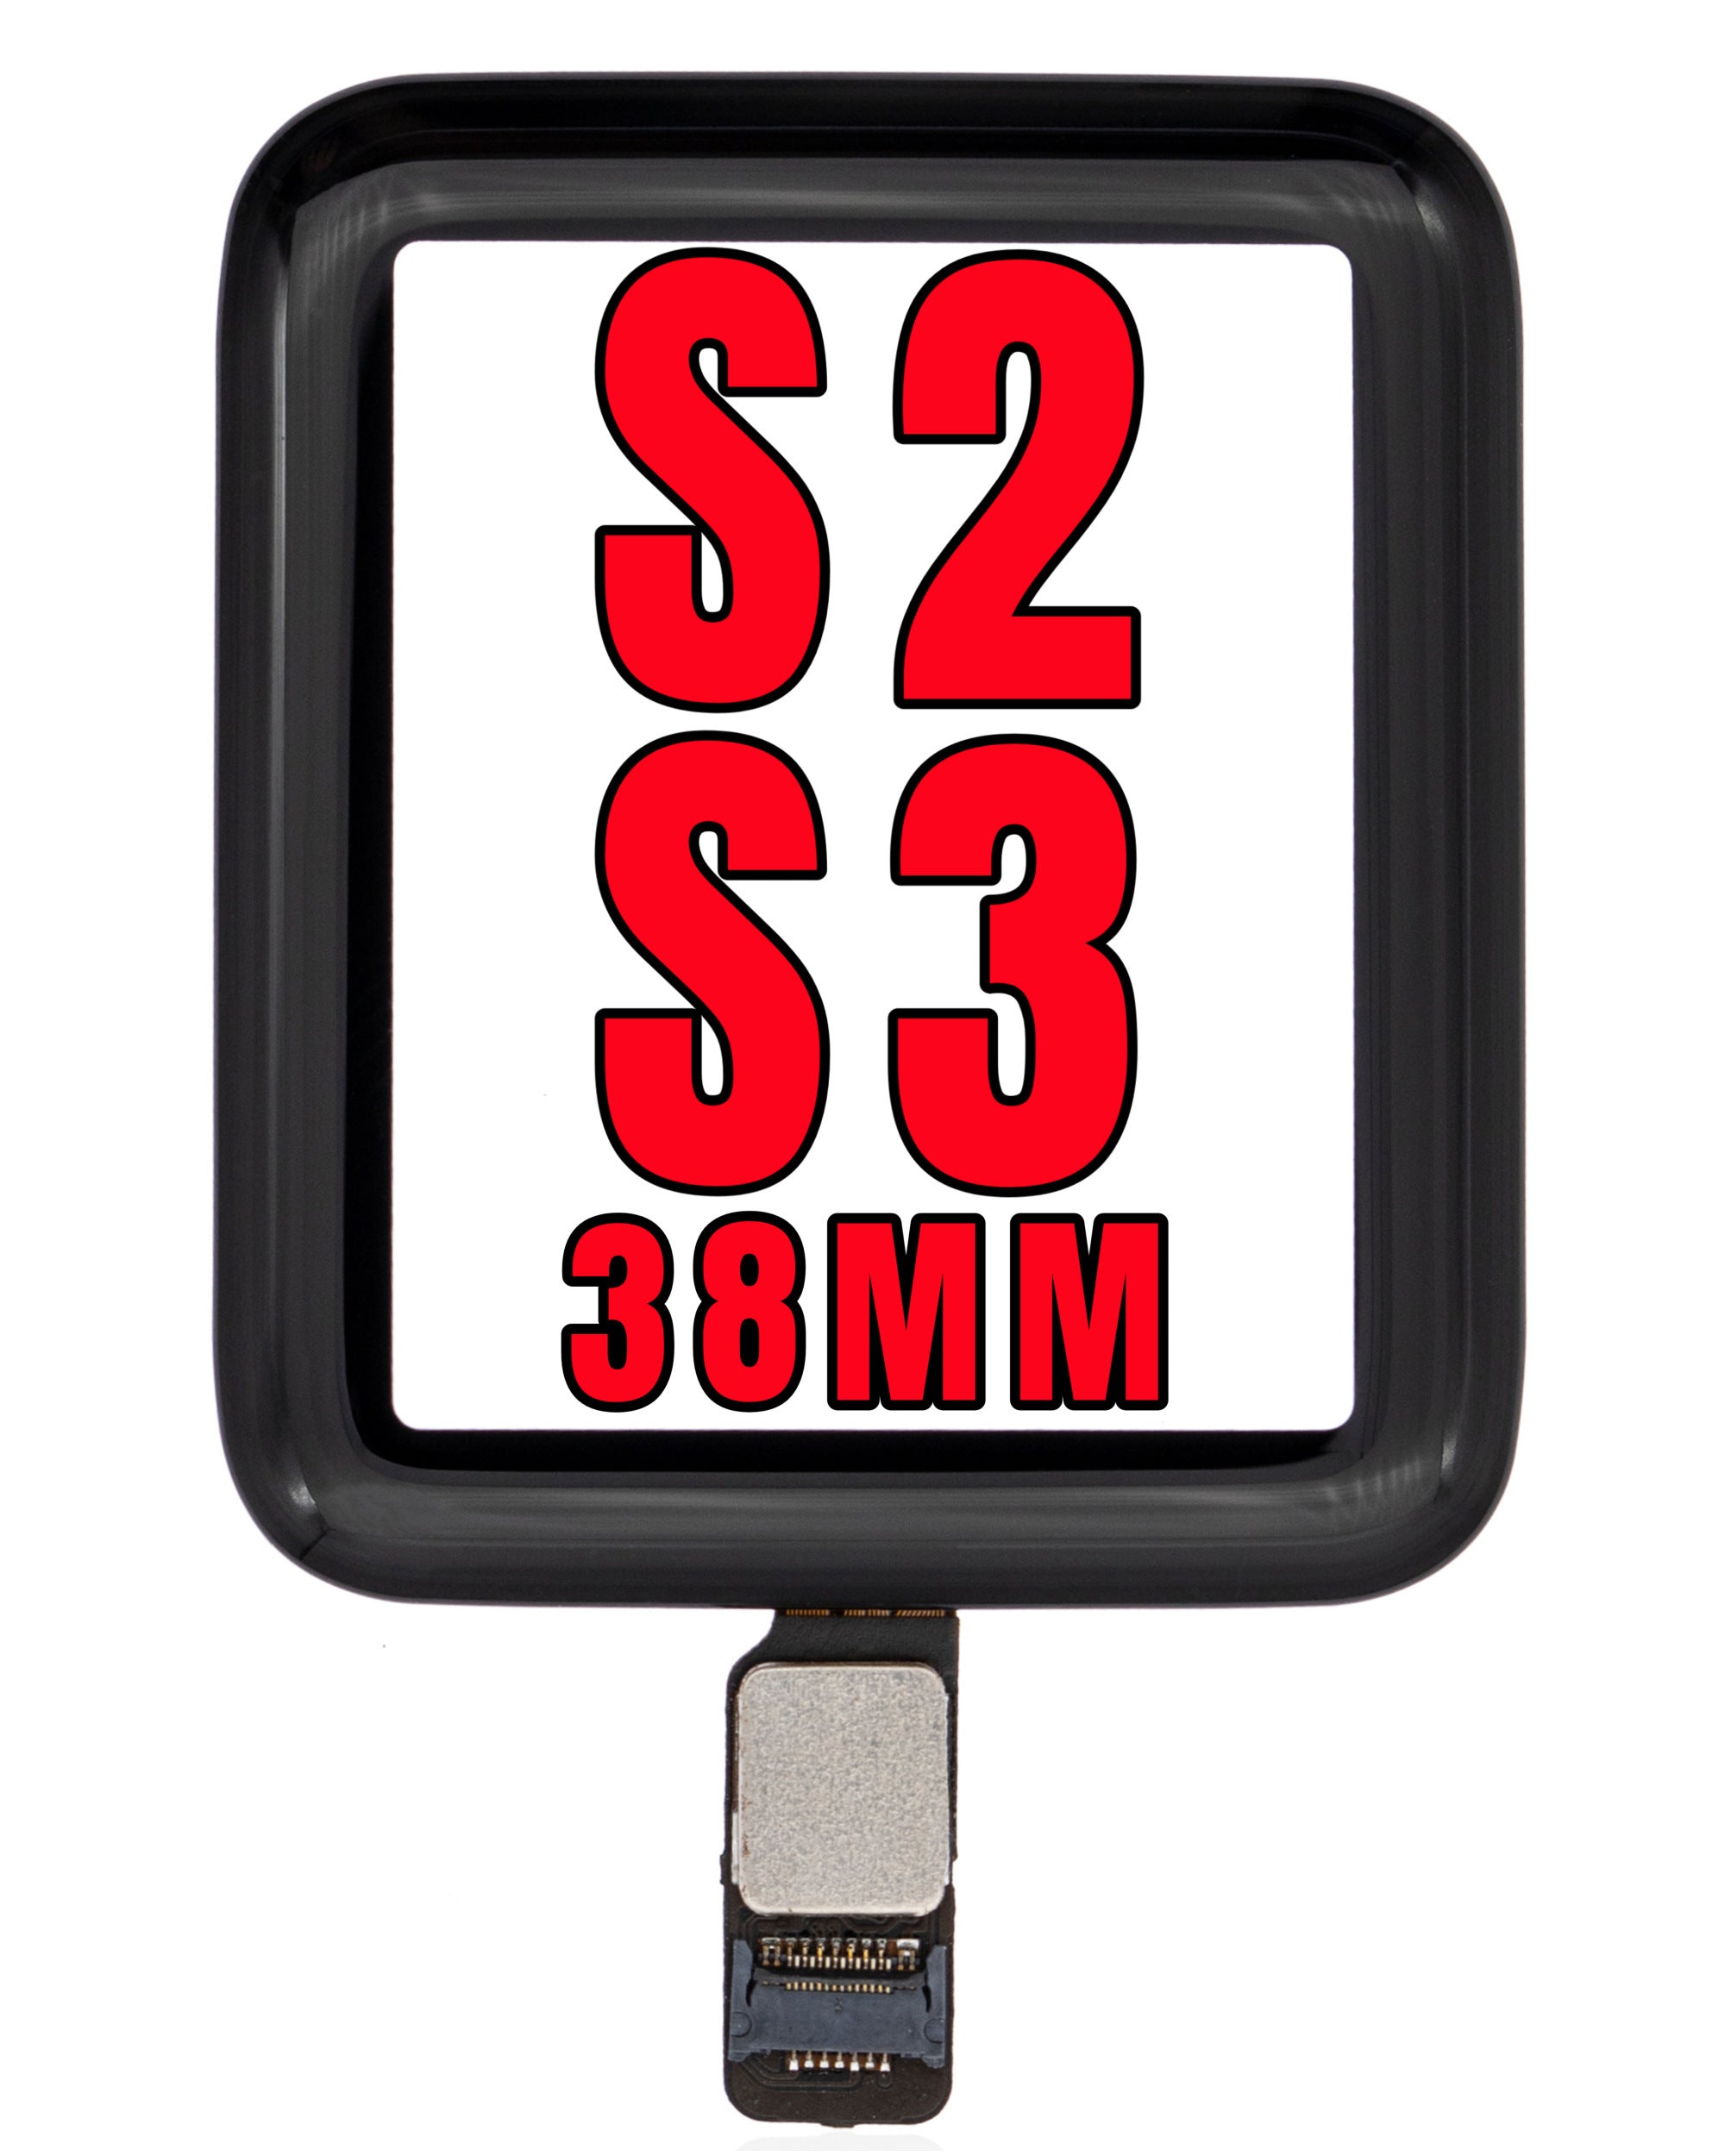 For Watch Series 2 / 3 (38MM) Digitizer Glass Replacement (Glass Separation Required)